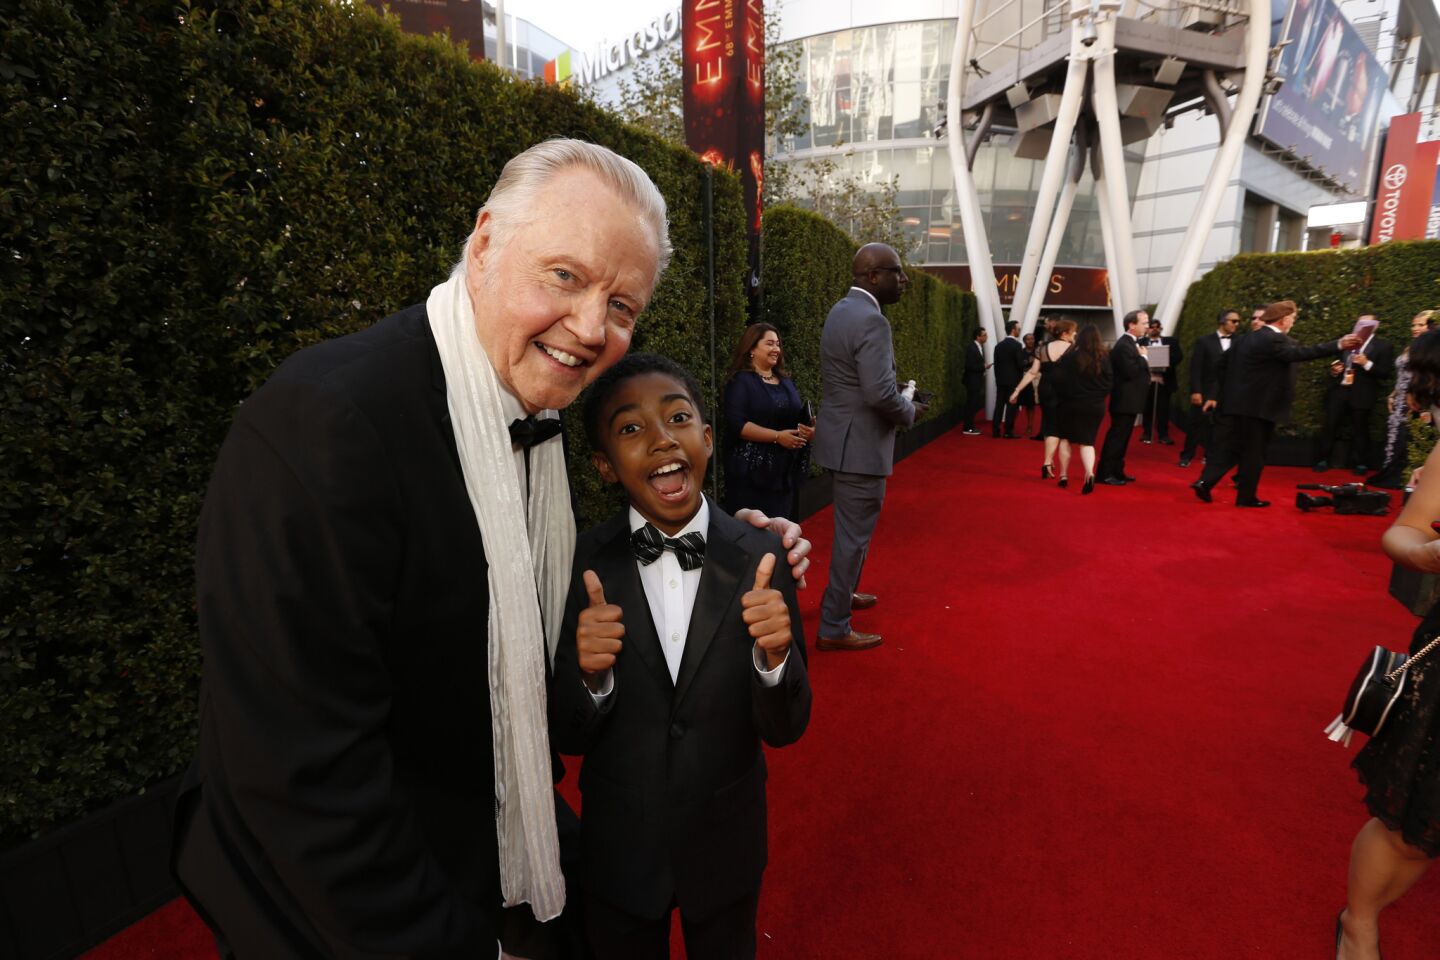 Jon Voight and Miles Brown of "black-ish" pose for a photo.